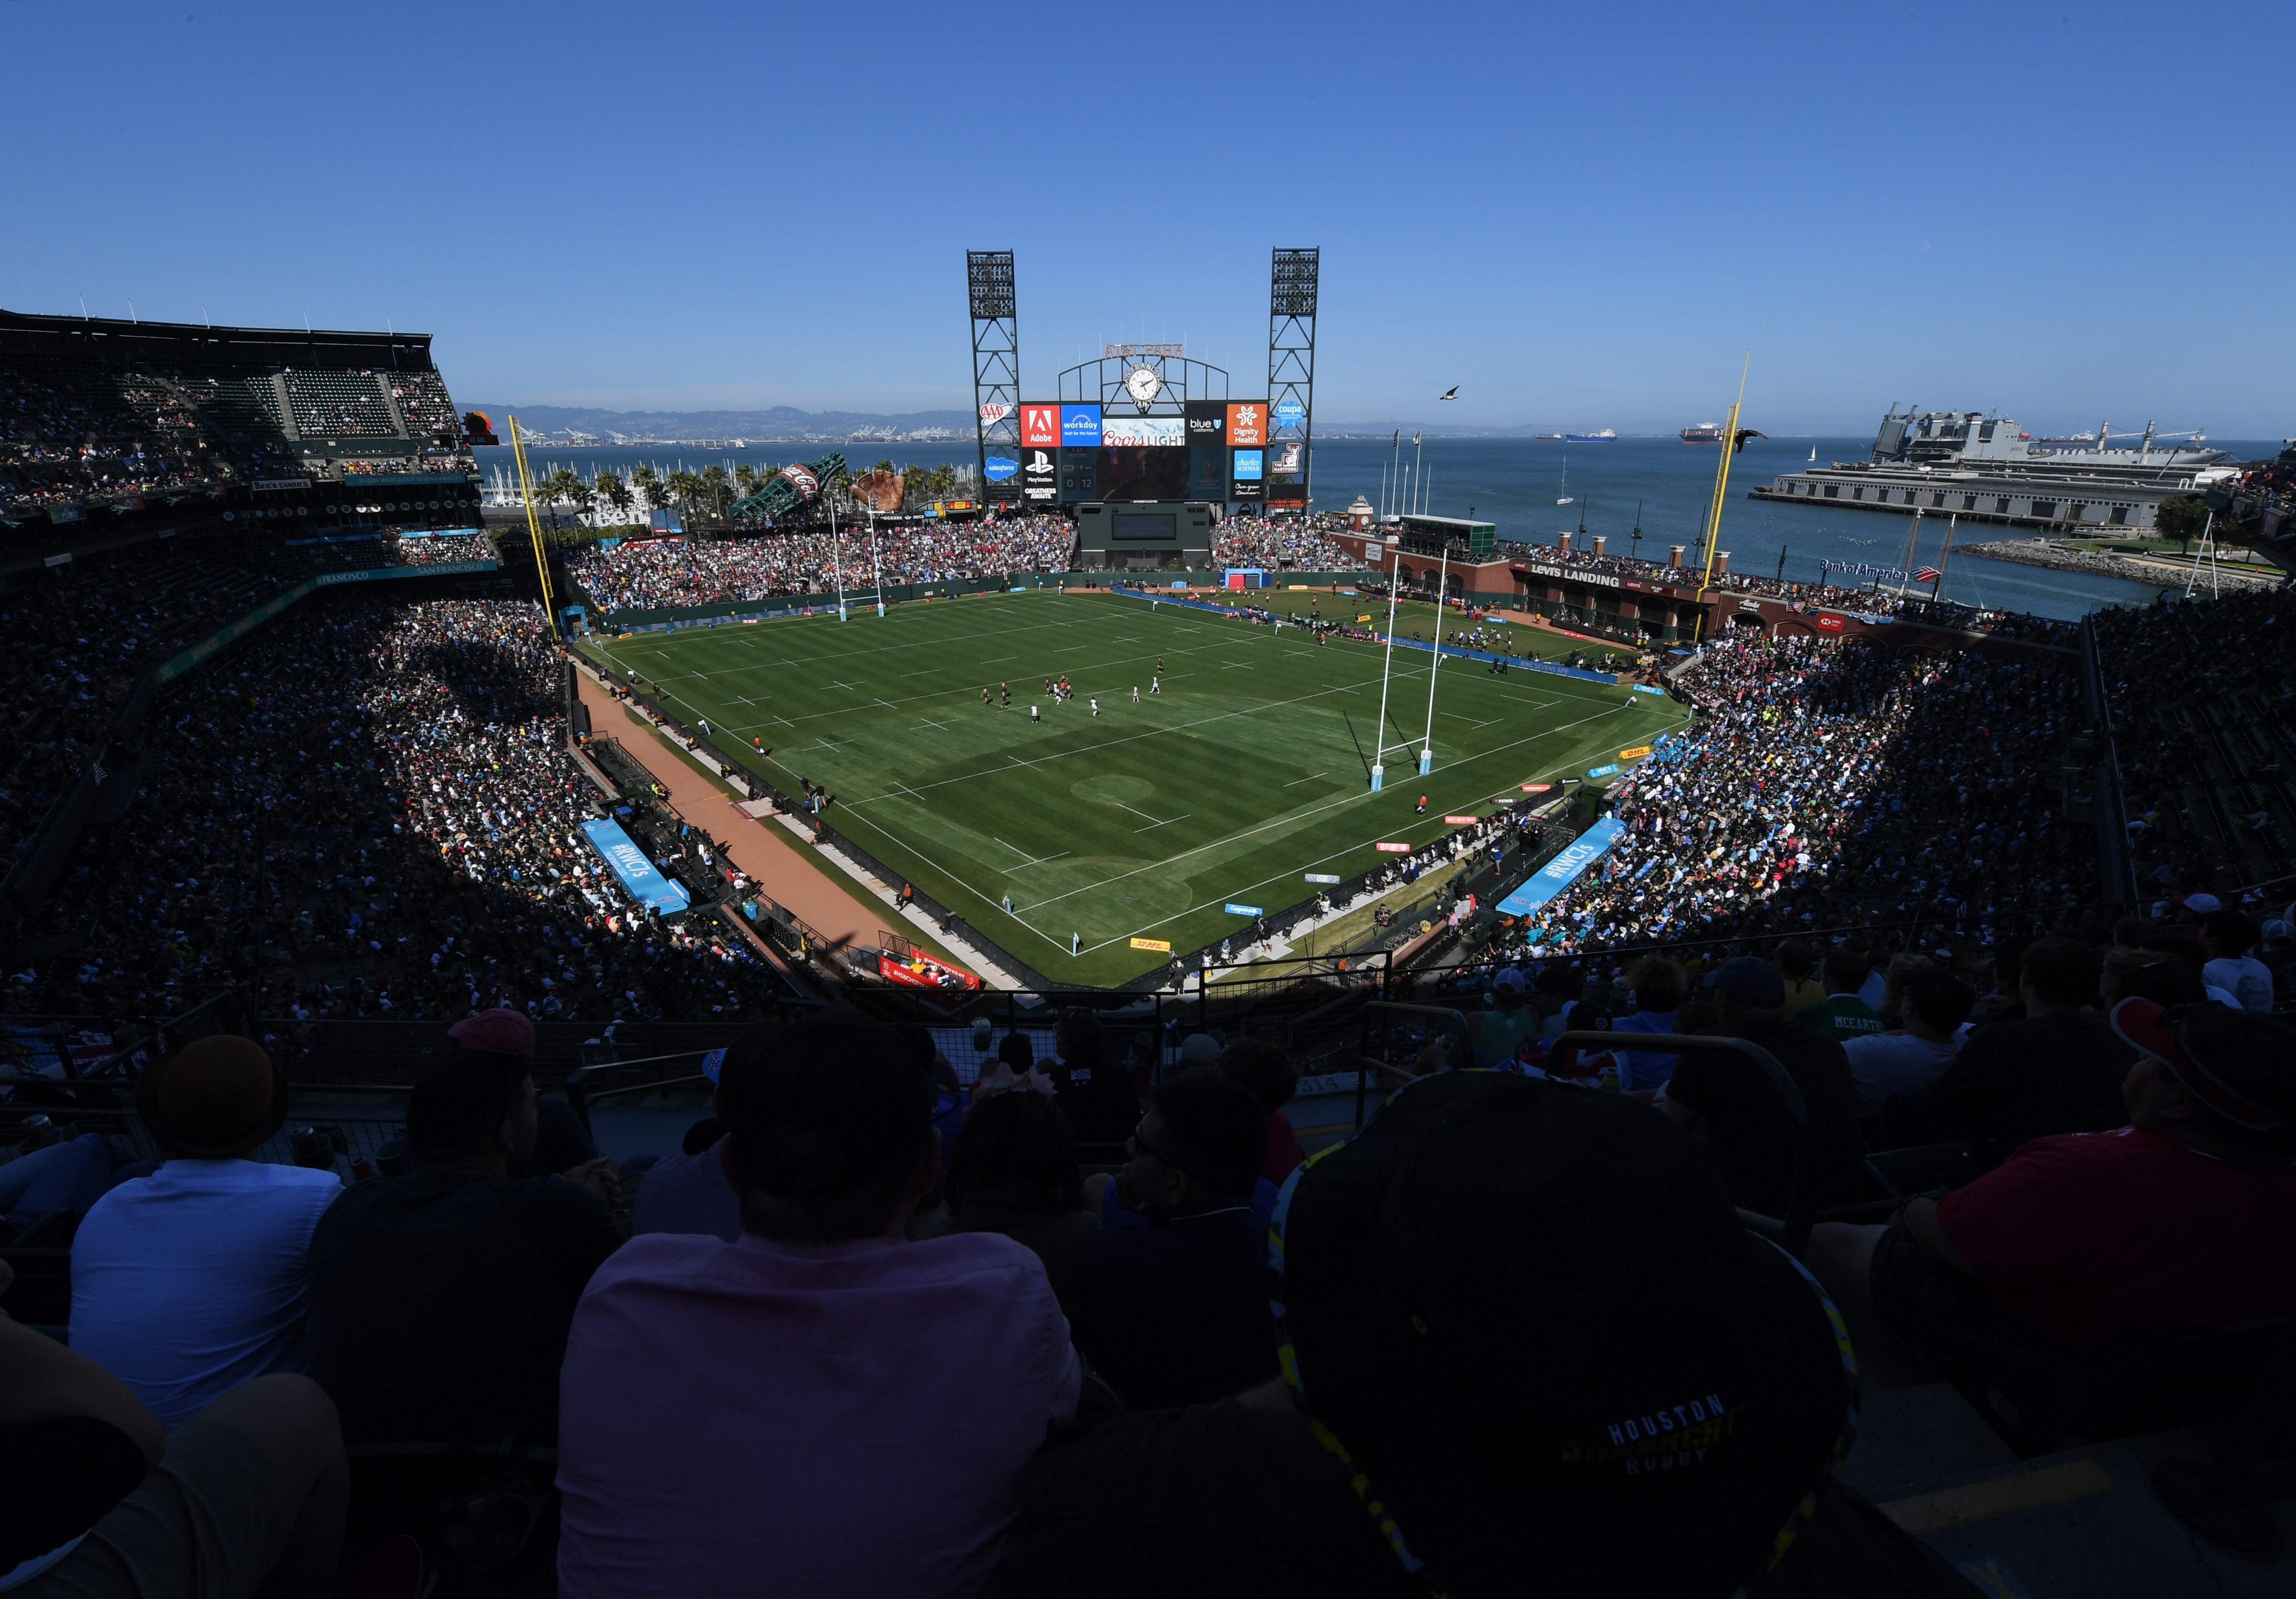 San Francisco Giants’ AT&T Park, which hosted the Rugby World Cup Sevens 2018. Photo: AFP